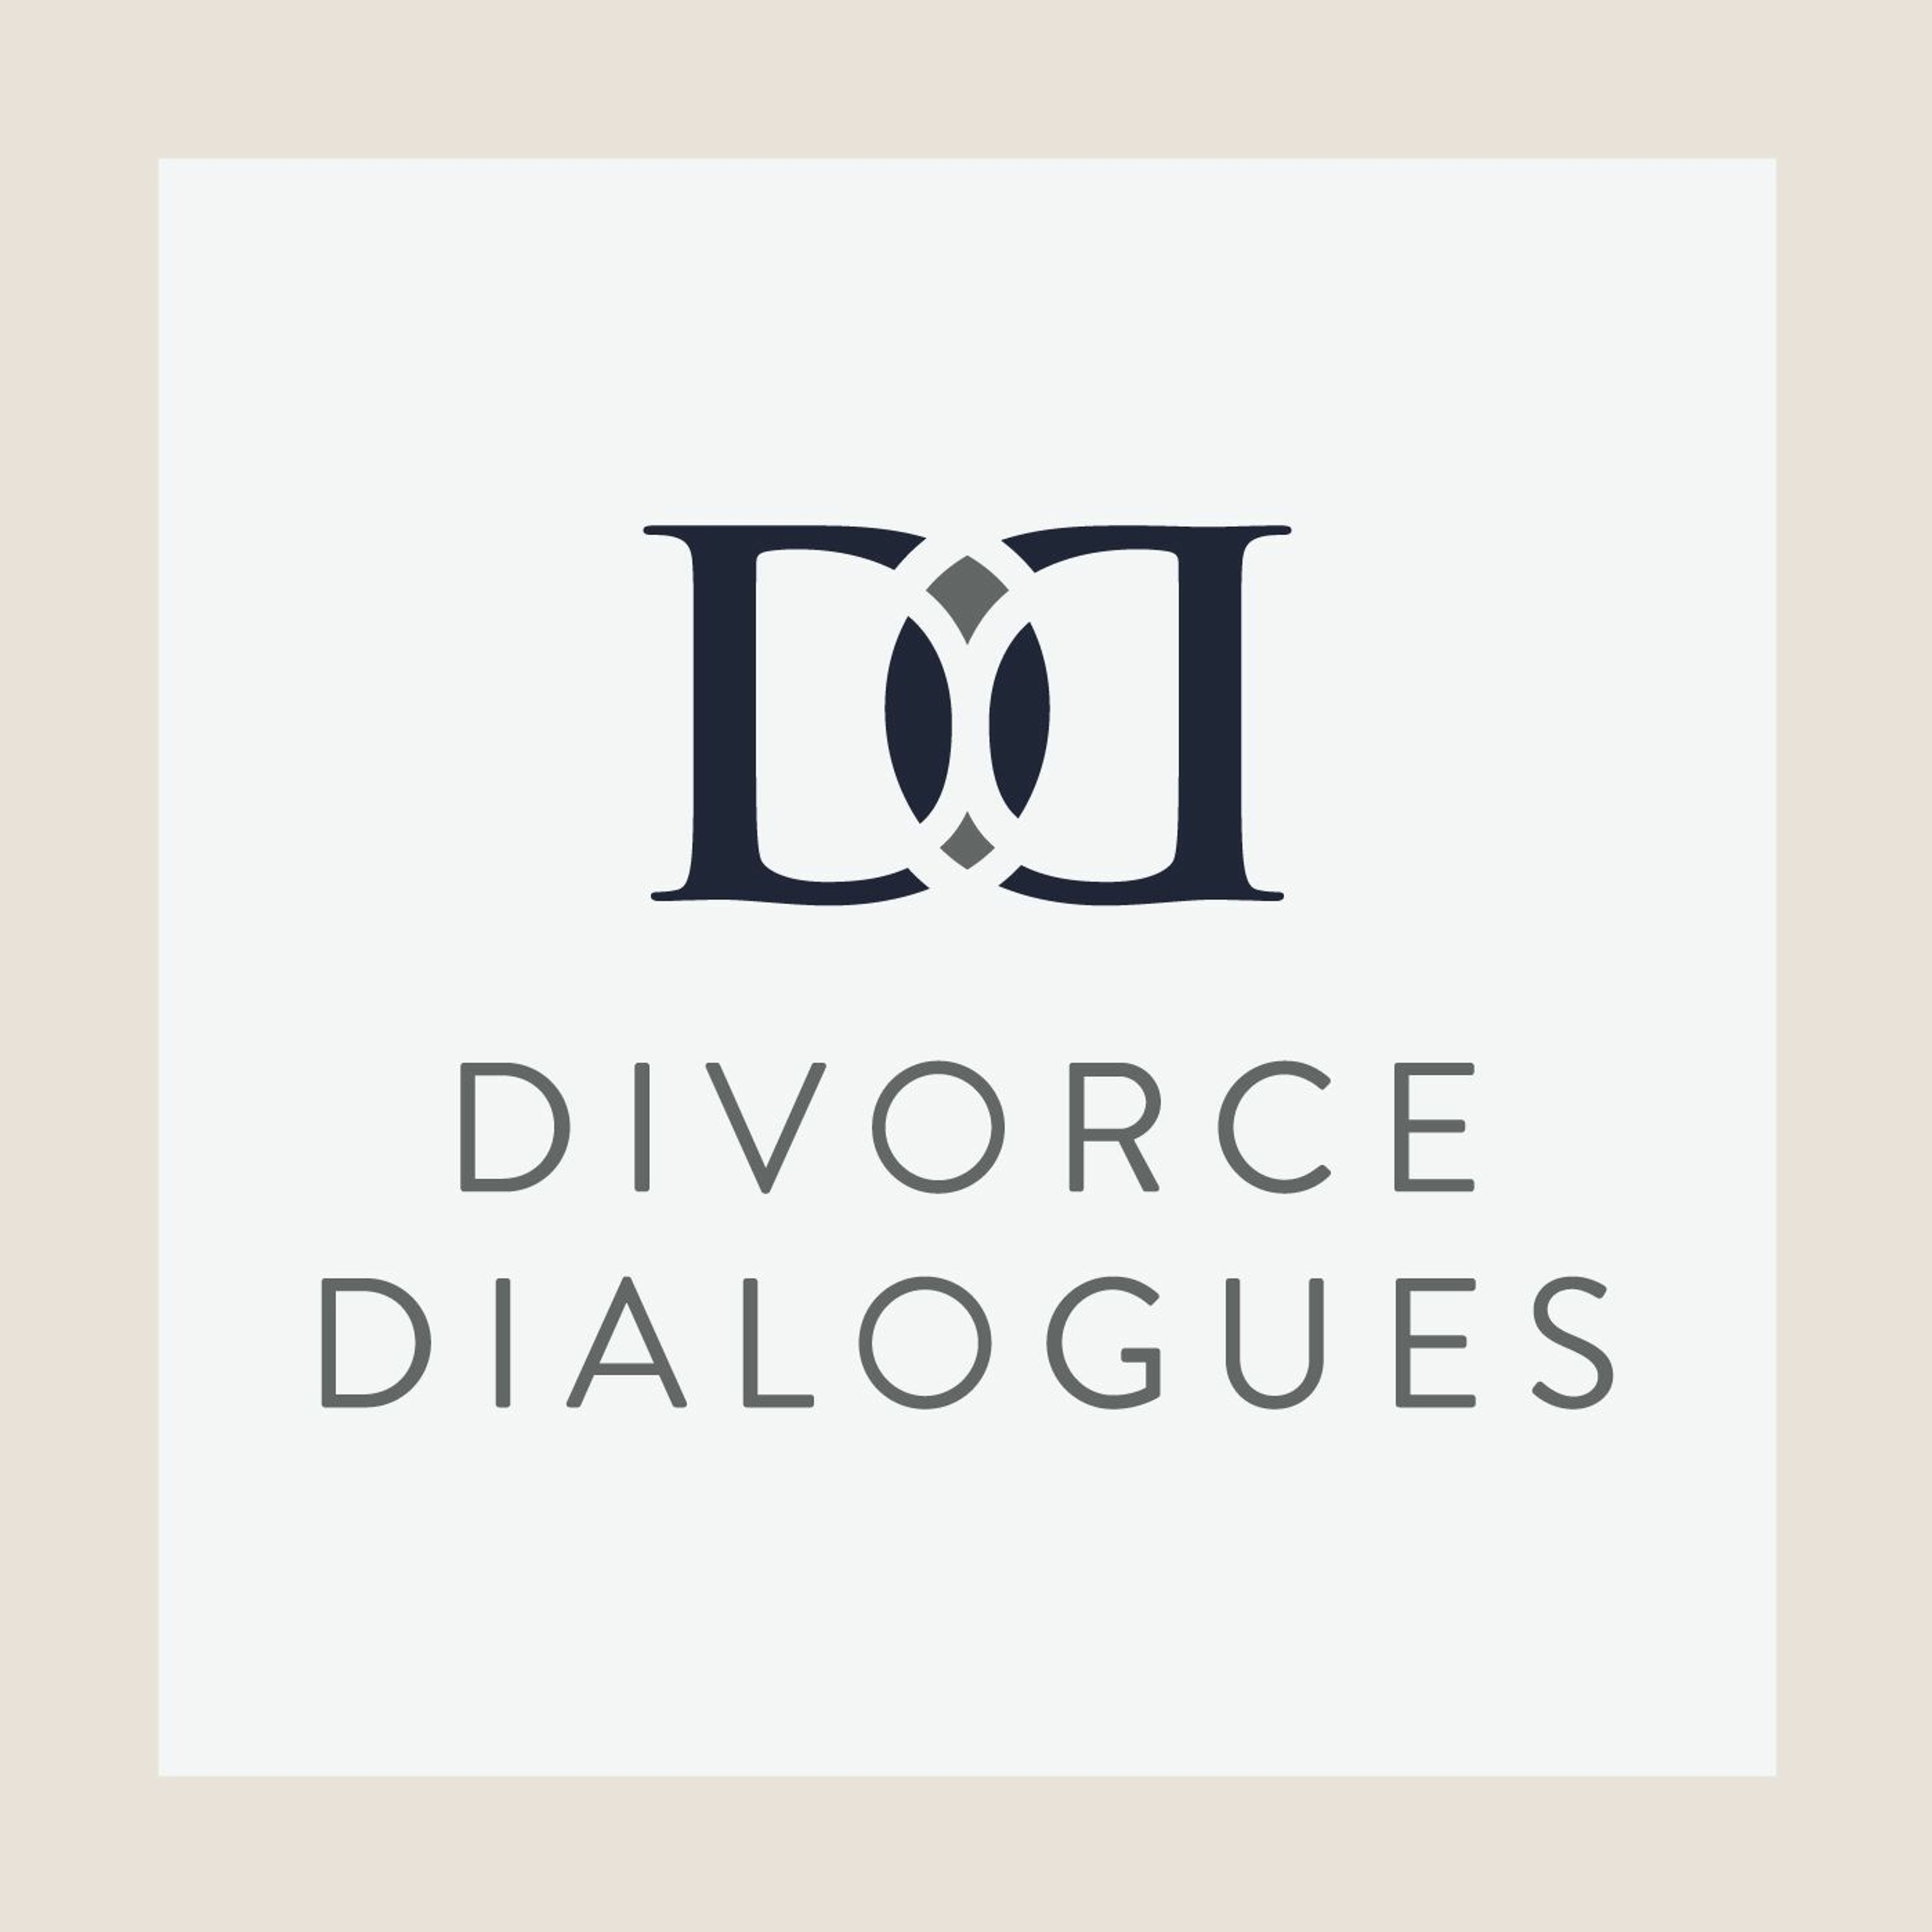 Divorce Dialogues - Leveraging Self-Compassion to Cope with Divorce With Dr. Kristin Neff